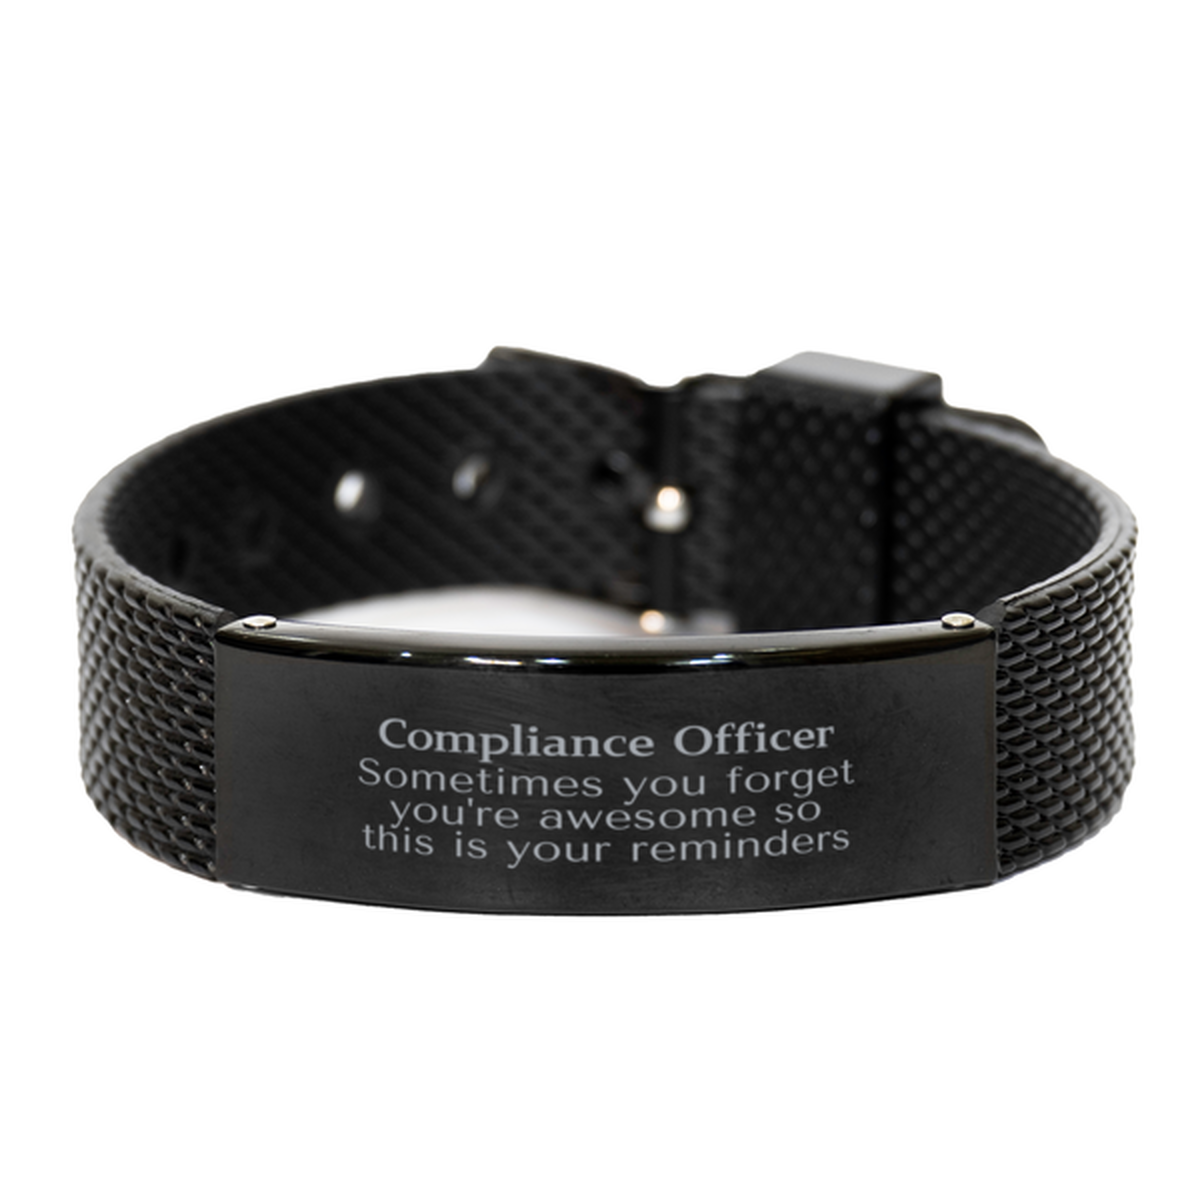 Sentimental Compliance Officer Black Shark Mesh Bracelet, Compliance Officer Sometimes you forget you're awesome so this is your reminders, Graduation Christmas Birthday Gifts for Compliance Officer, Men, Women, Coworkers